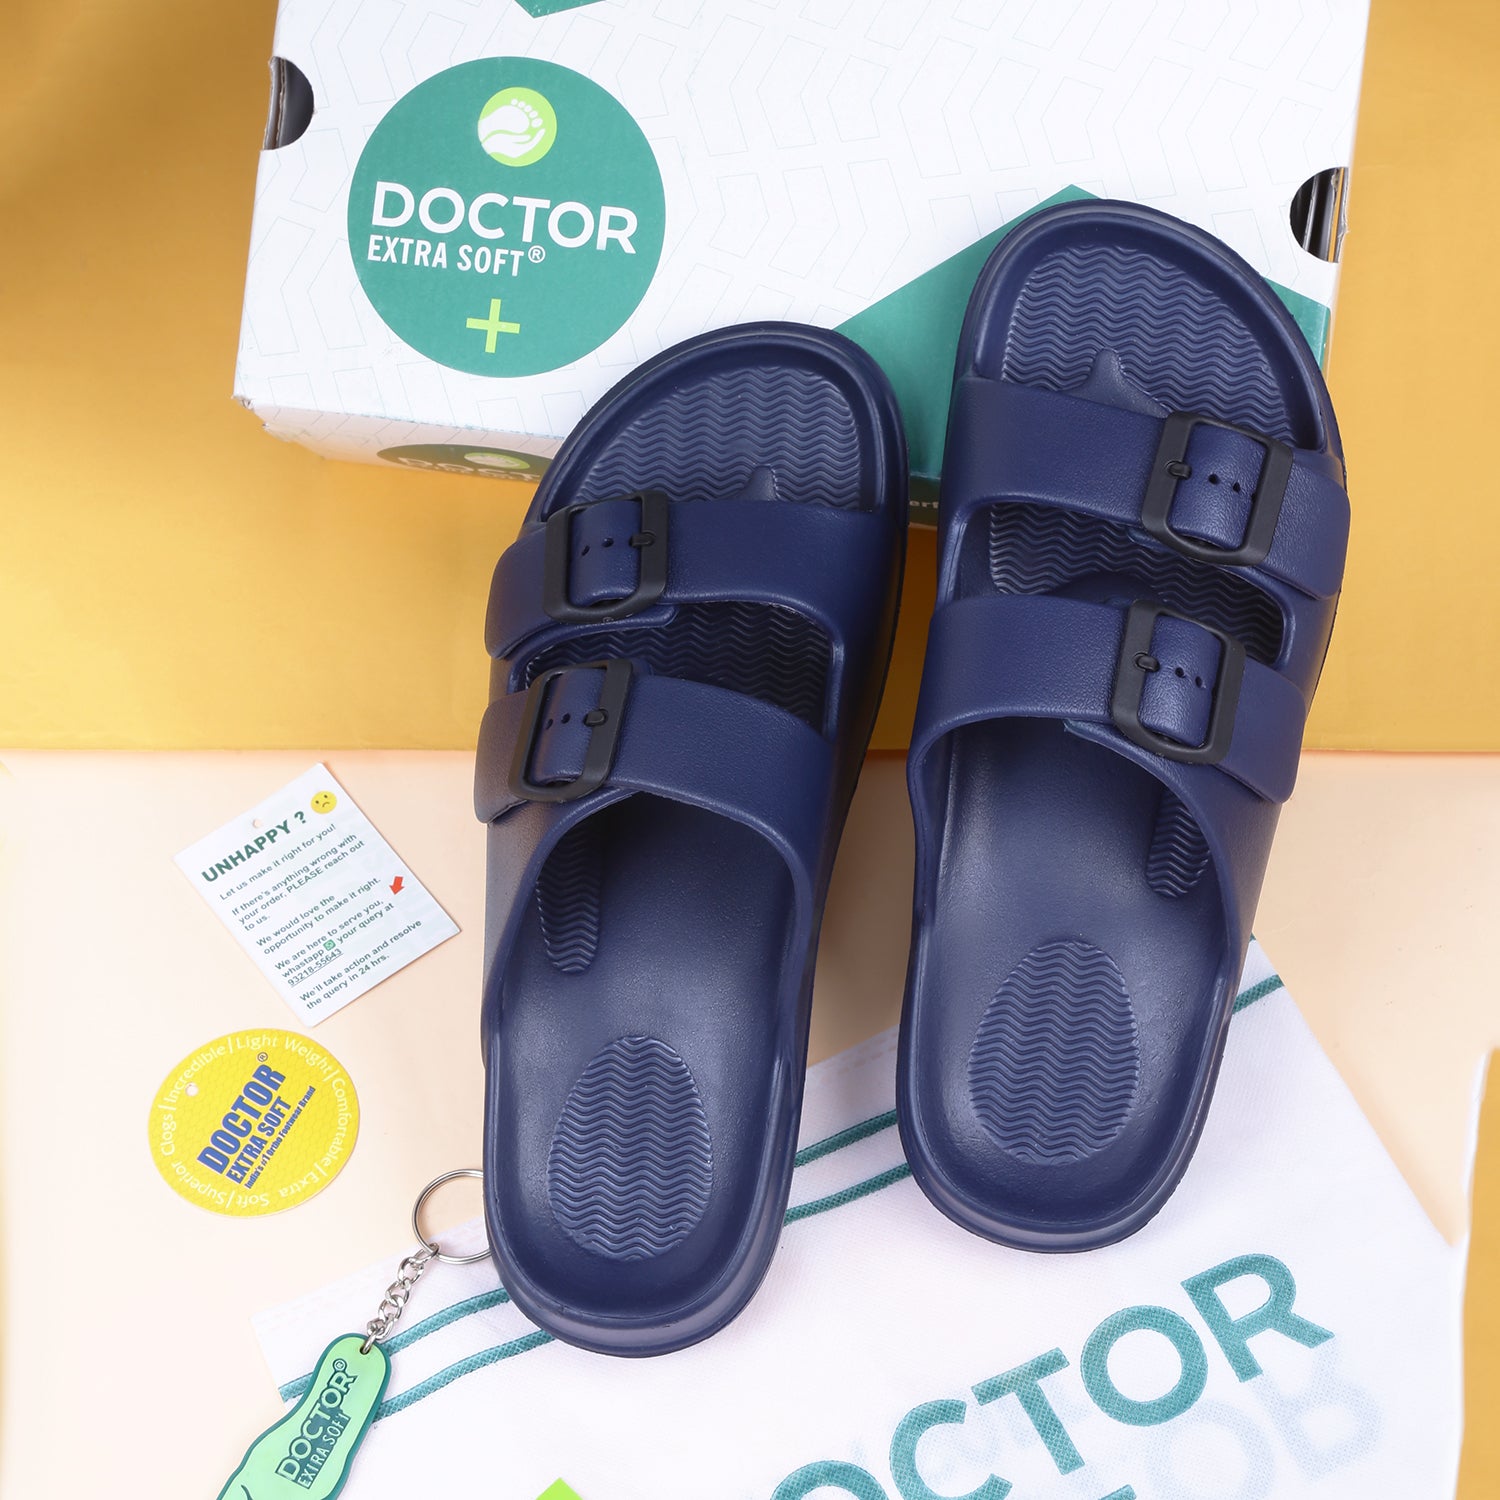 DOCTOR EXTRA SOFT Womens Sandals Ortho Care Orthopaedic Diabetic Daily Use  Dr Sole Casual Chappals at Rs 250/pair | Womens Sandals in Mumbai | ID:  2851540230055